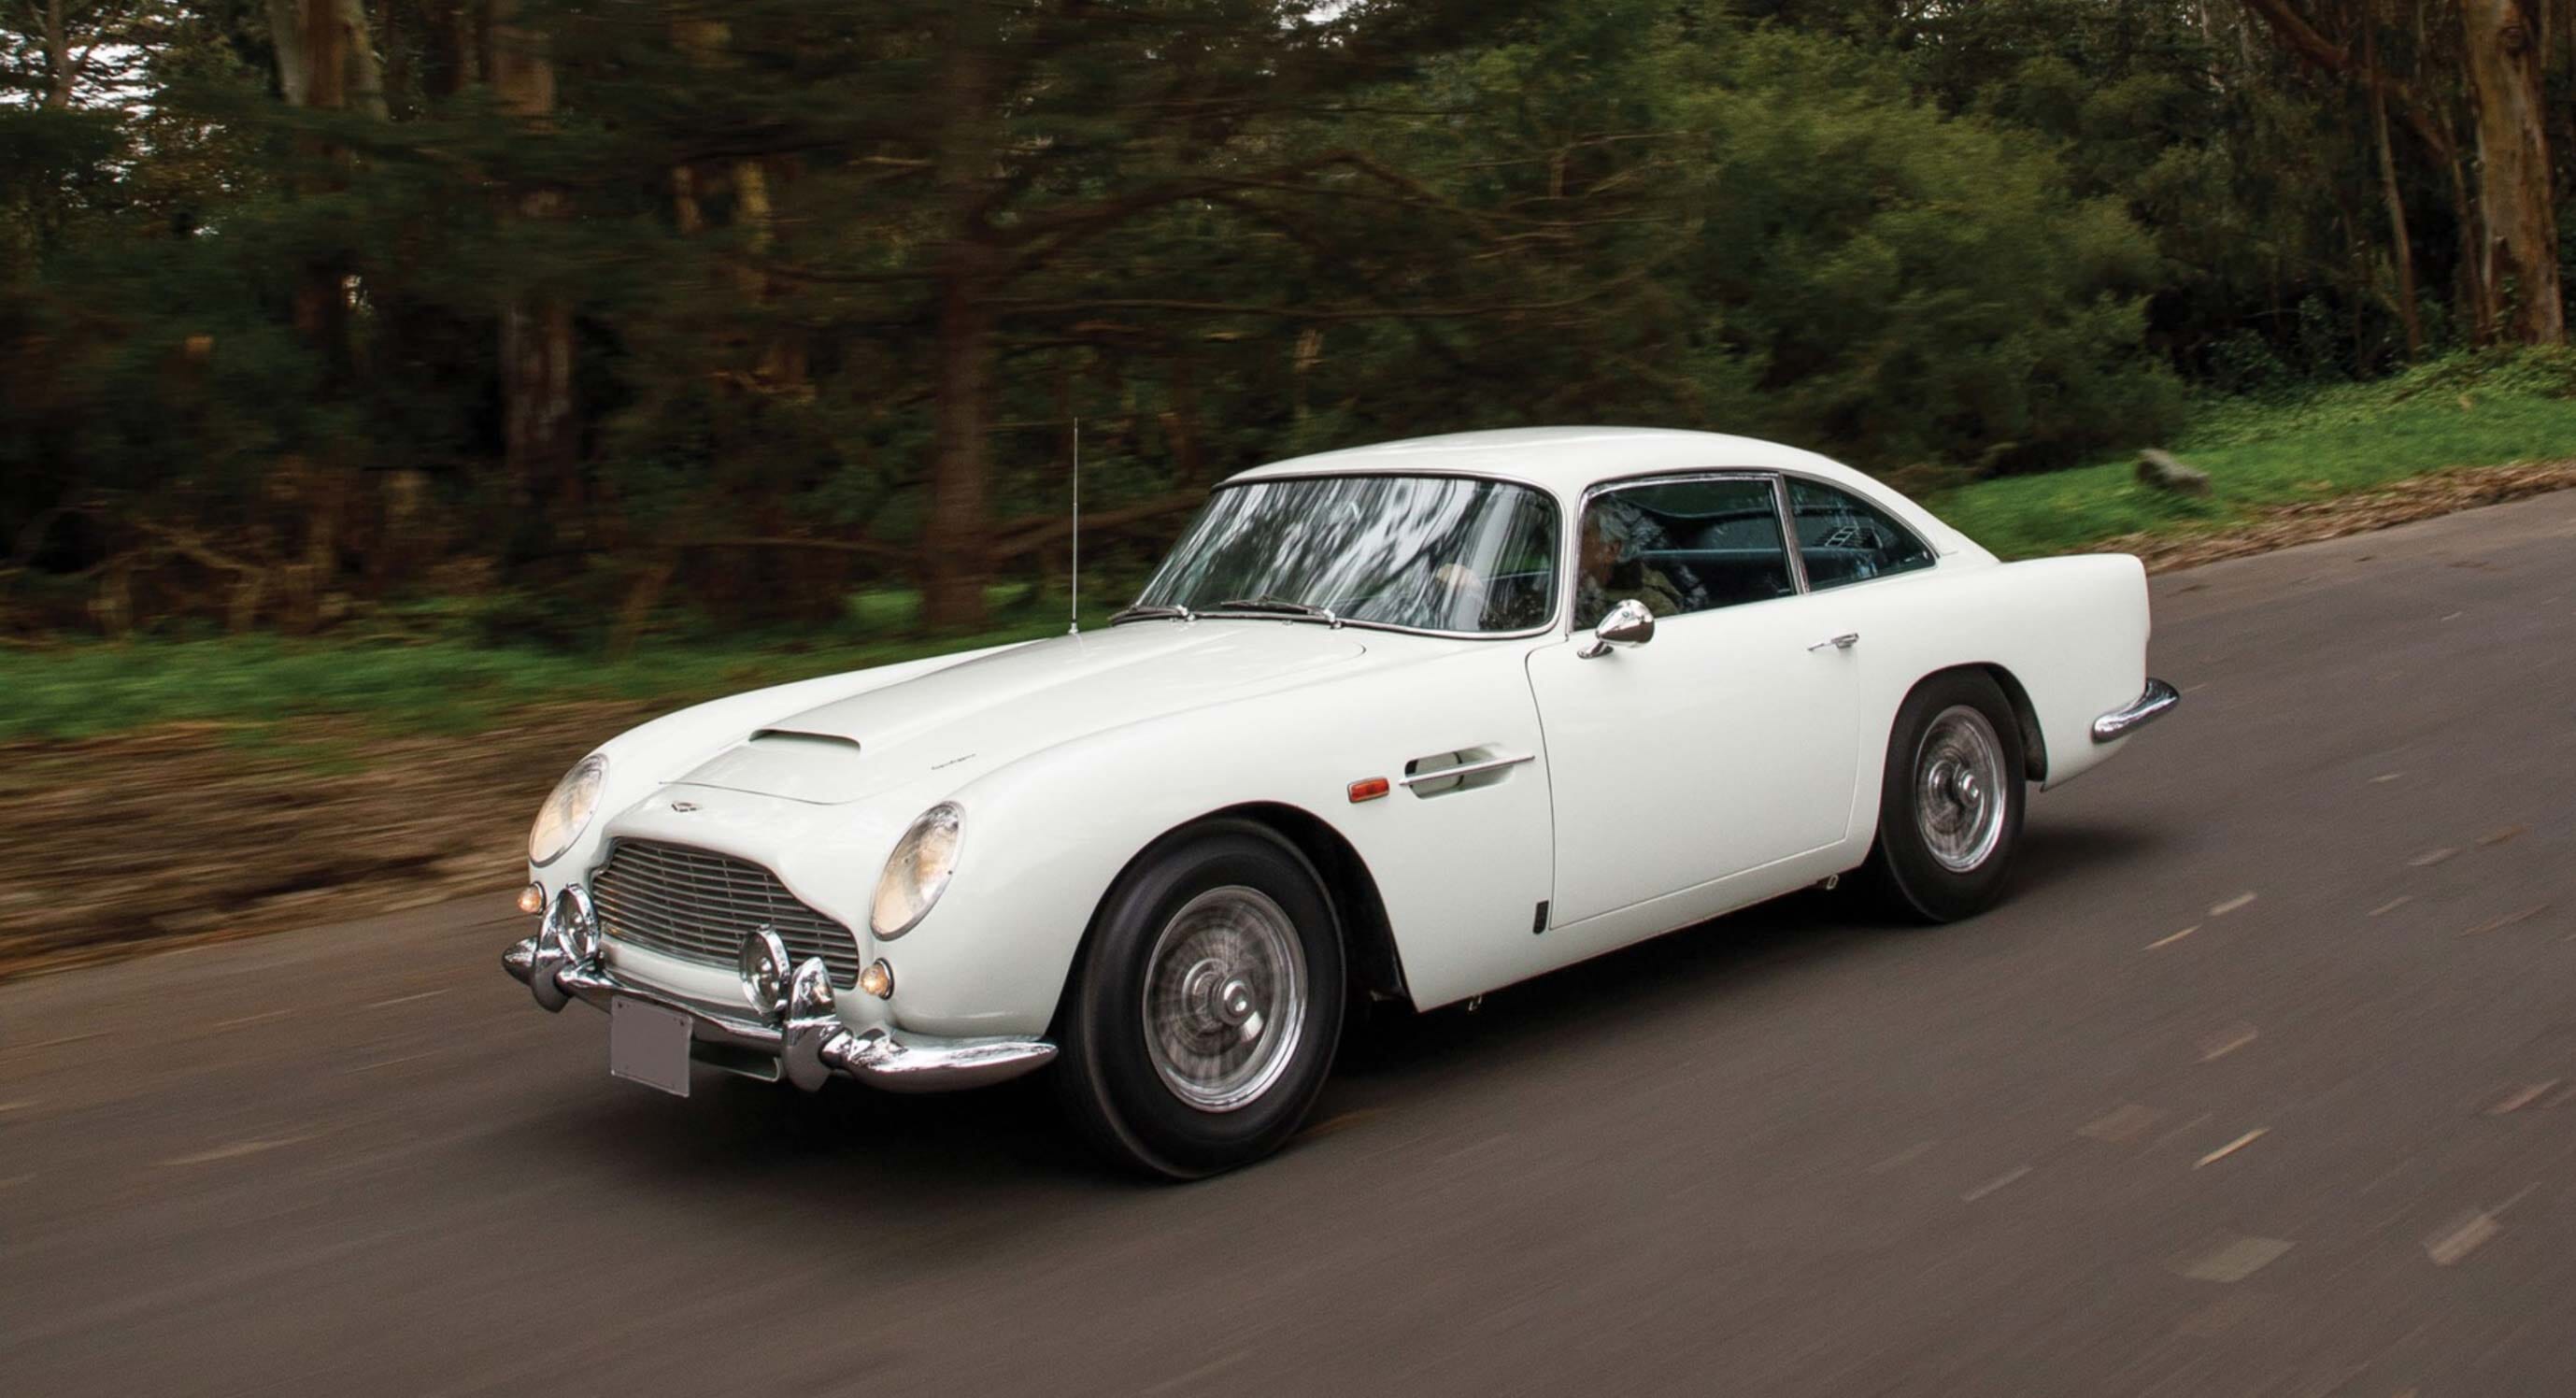 Drive Part Of Motoring History With This 1964 Aston Martin DB5